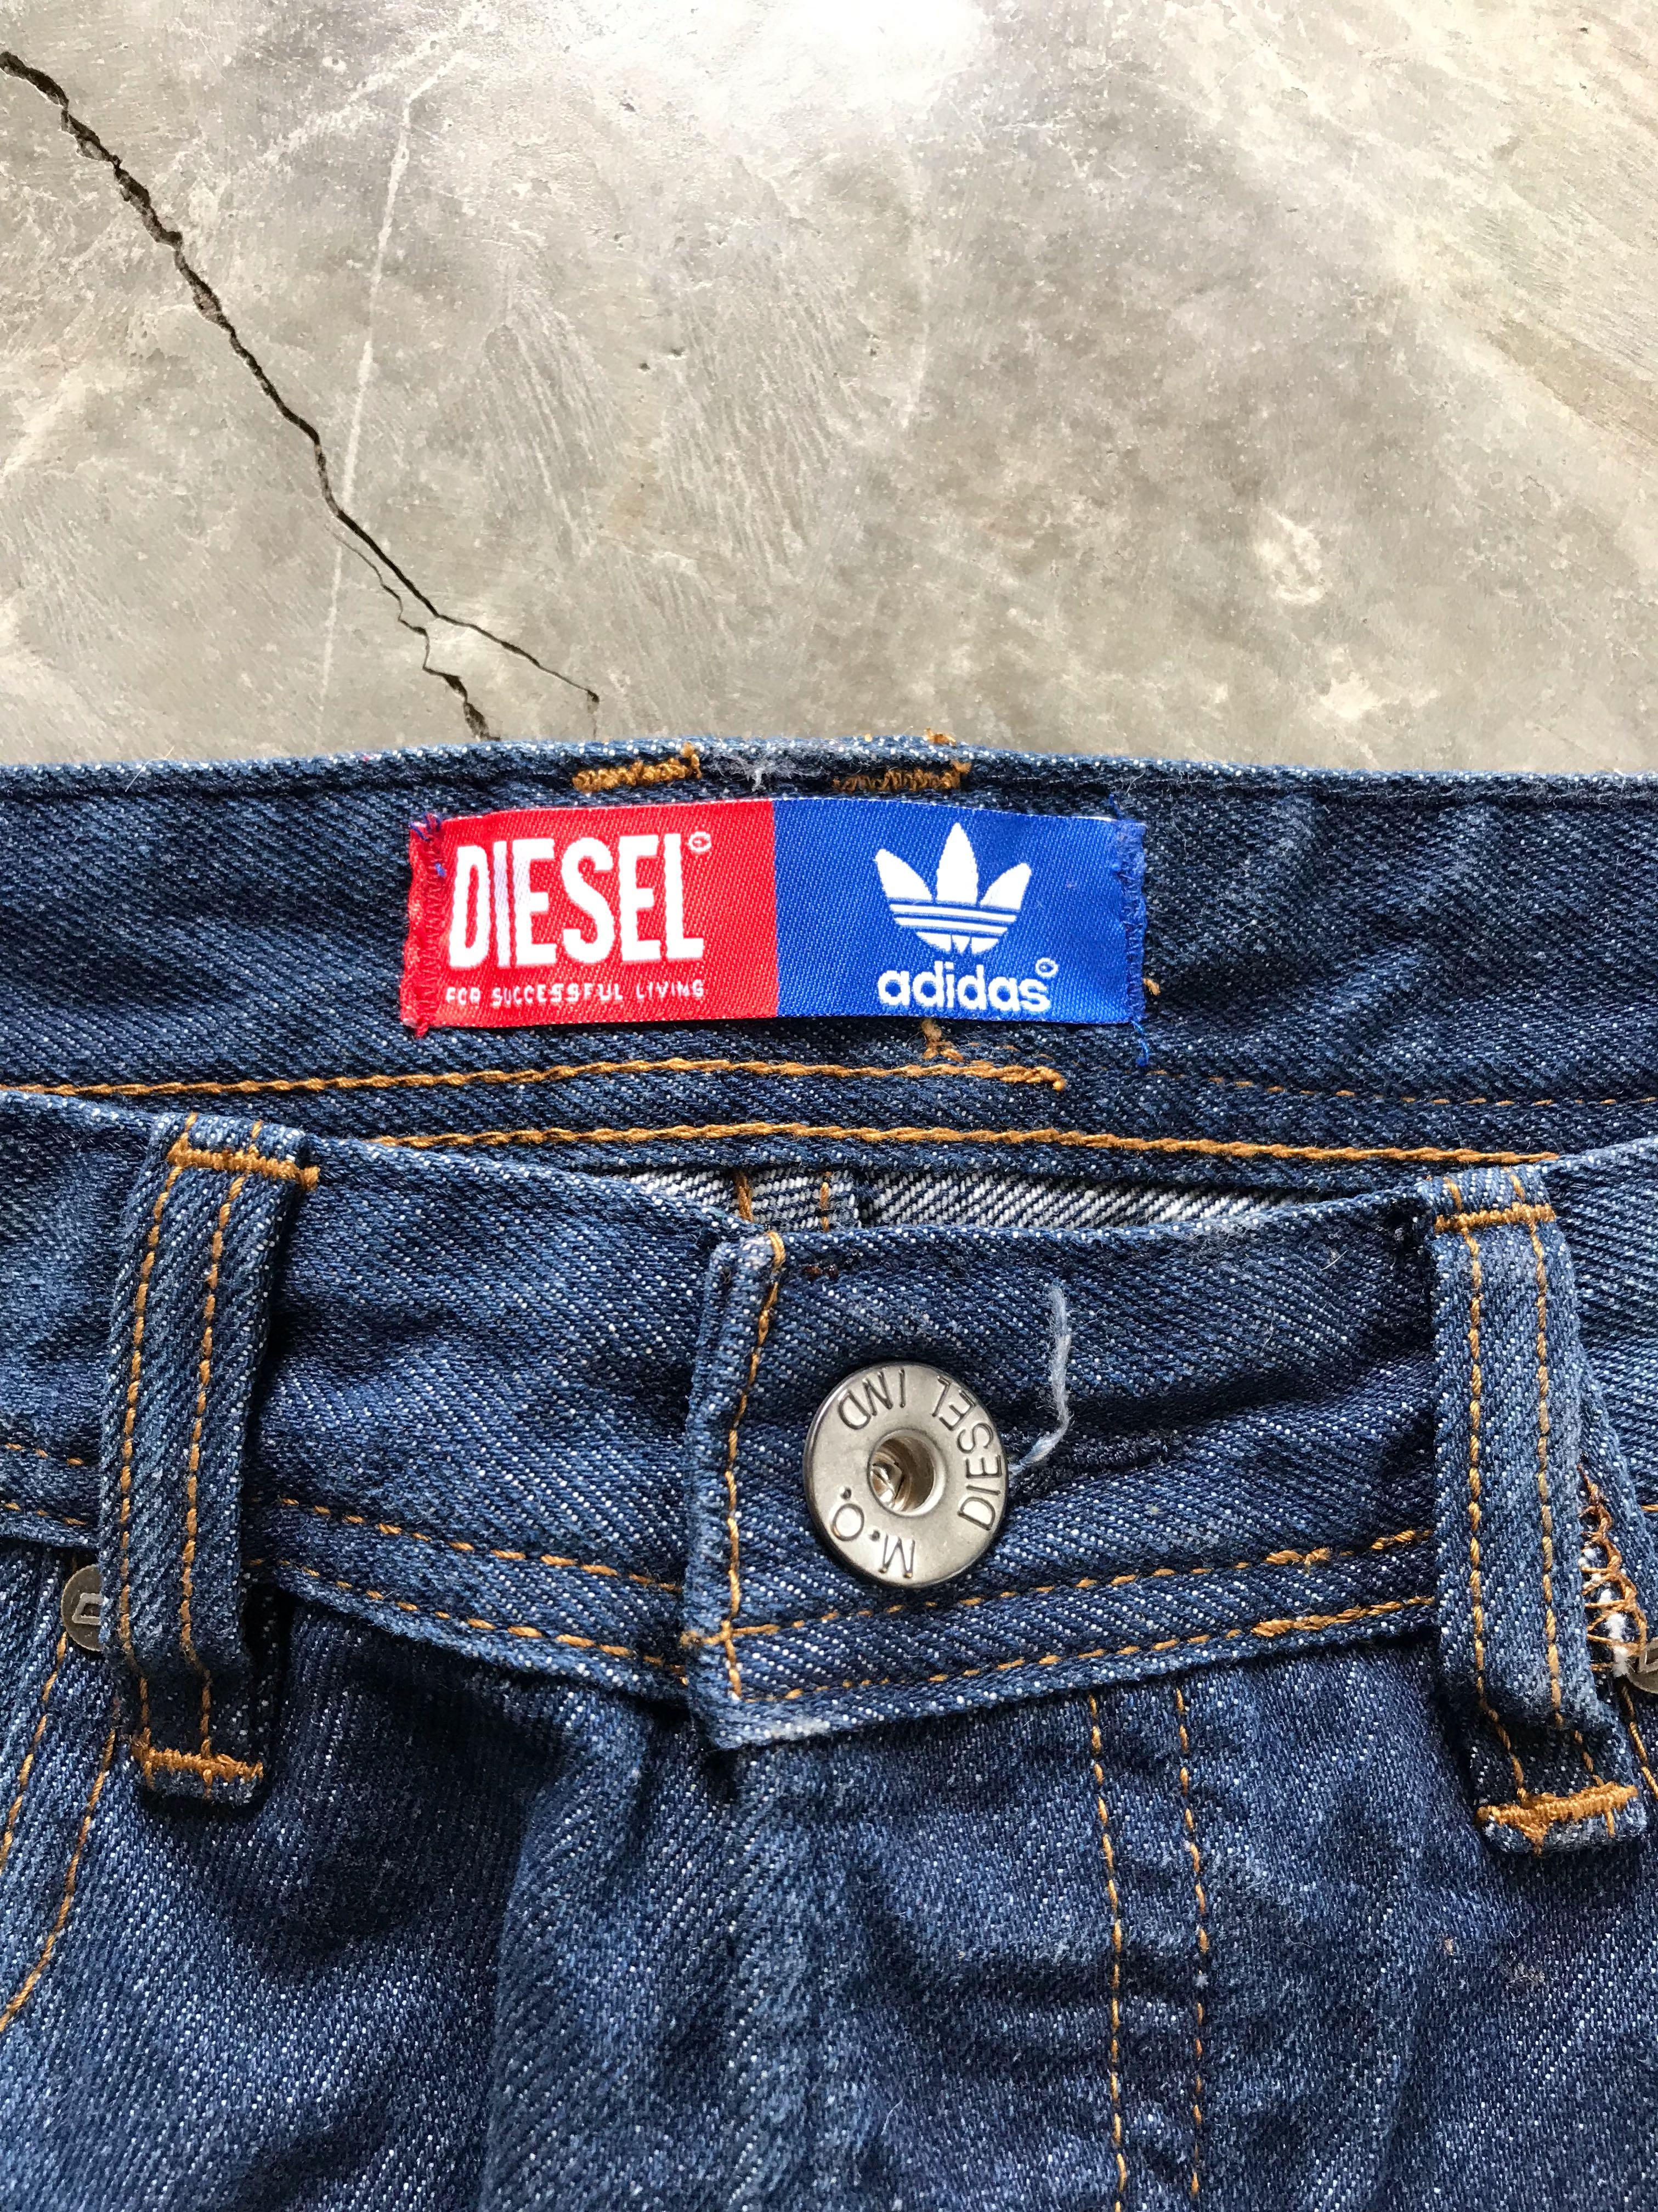 Diesel x Adidas pants made Italy, Men's Bottoms, Trousers on Carousell